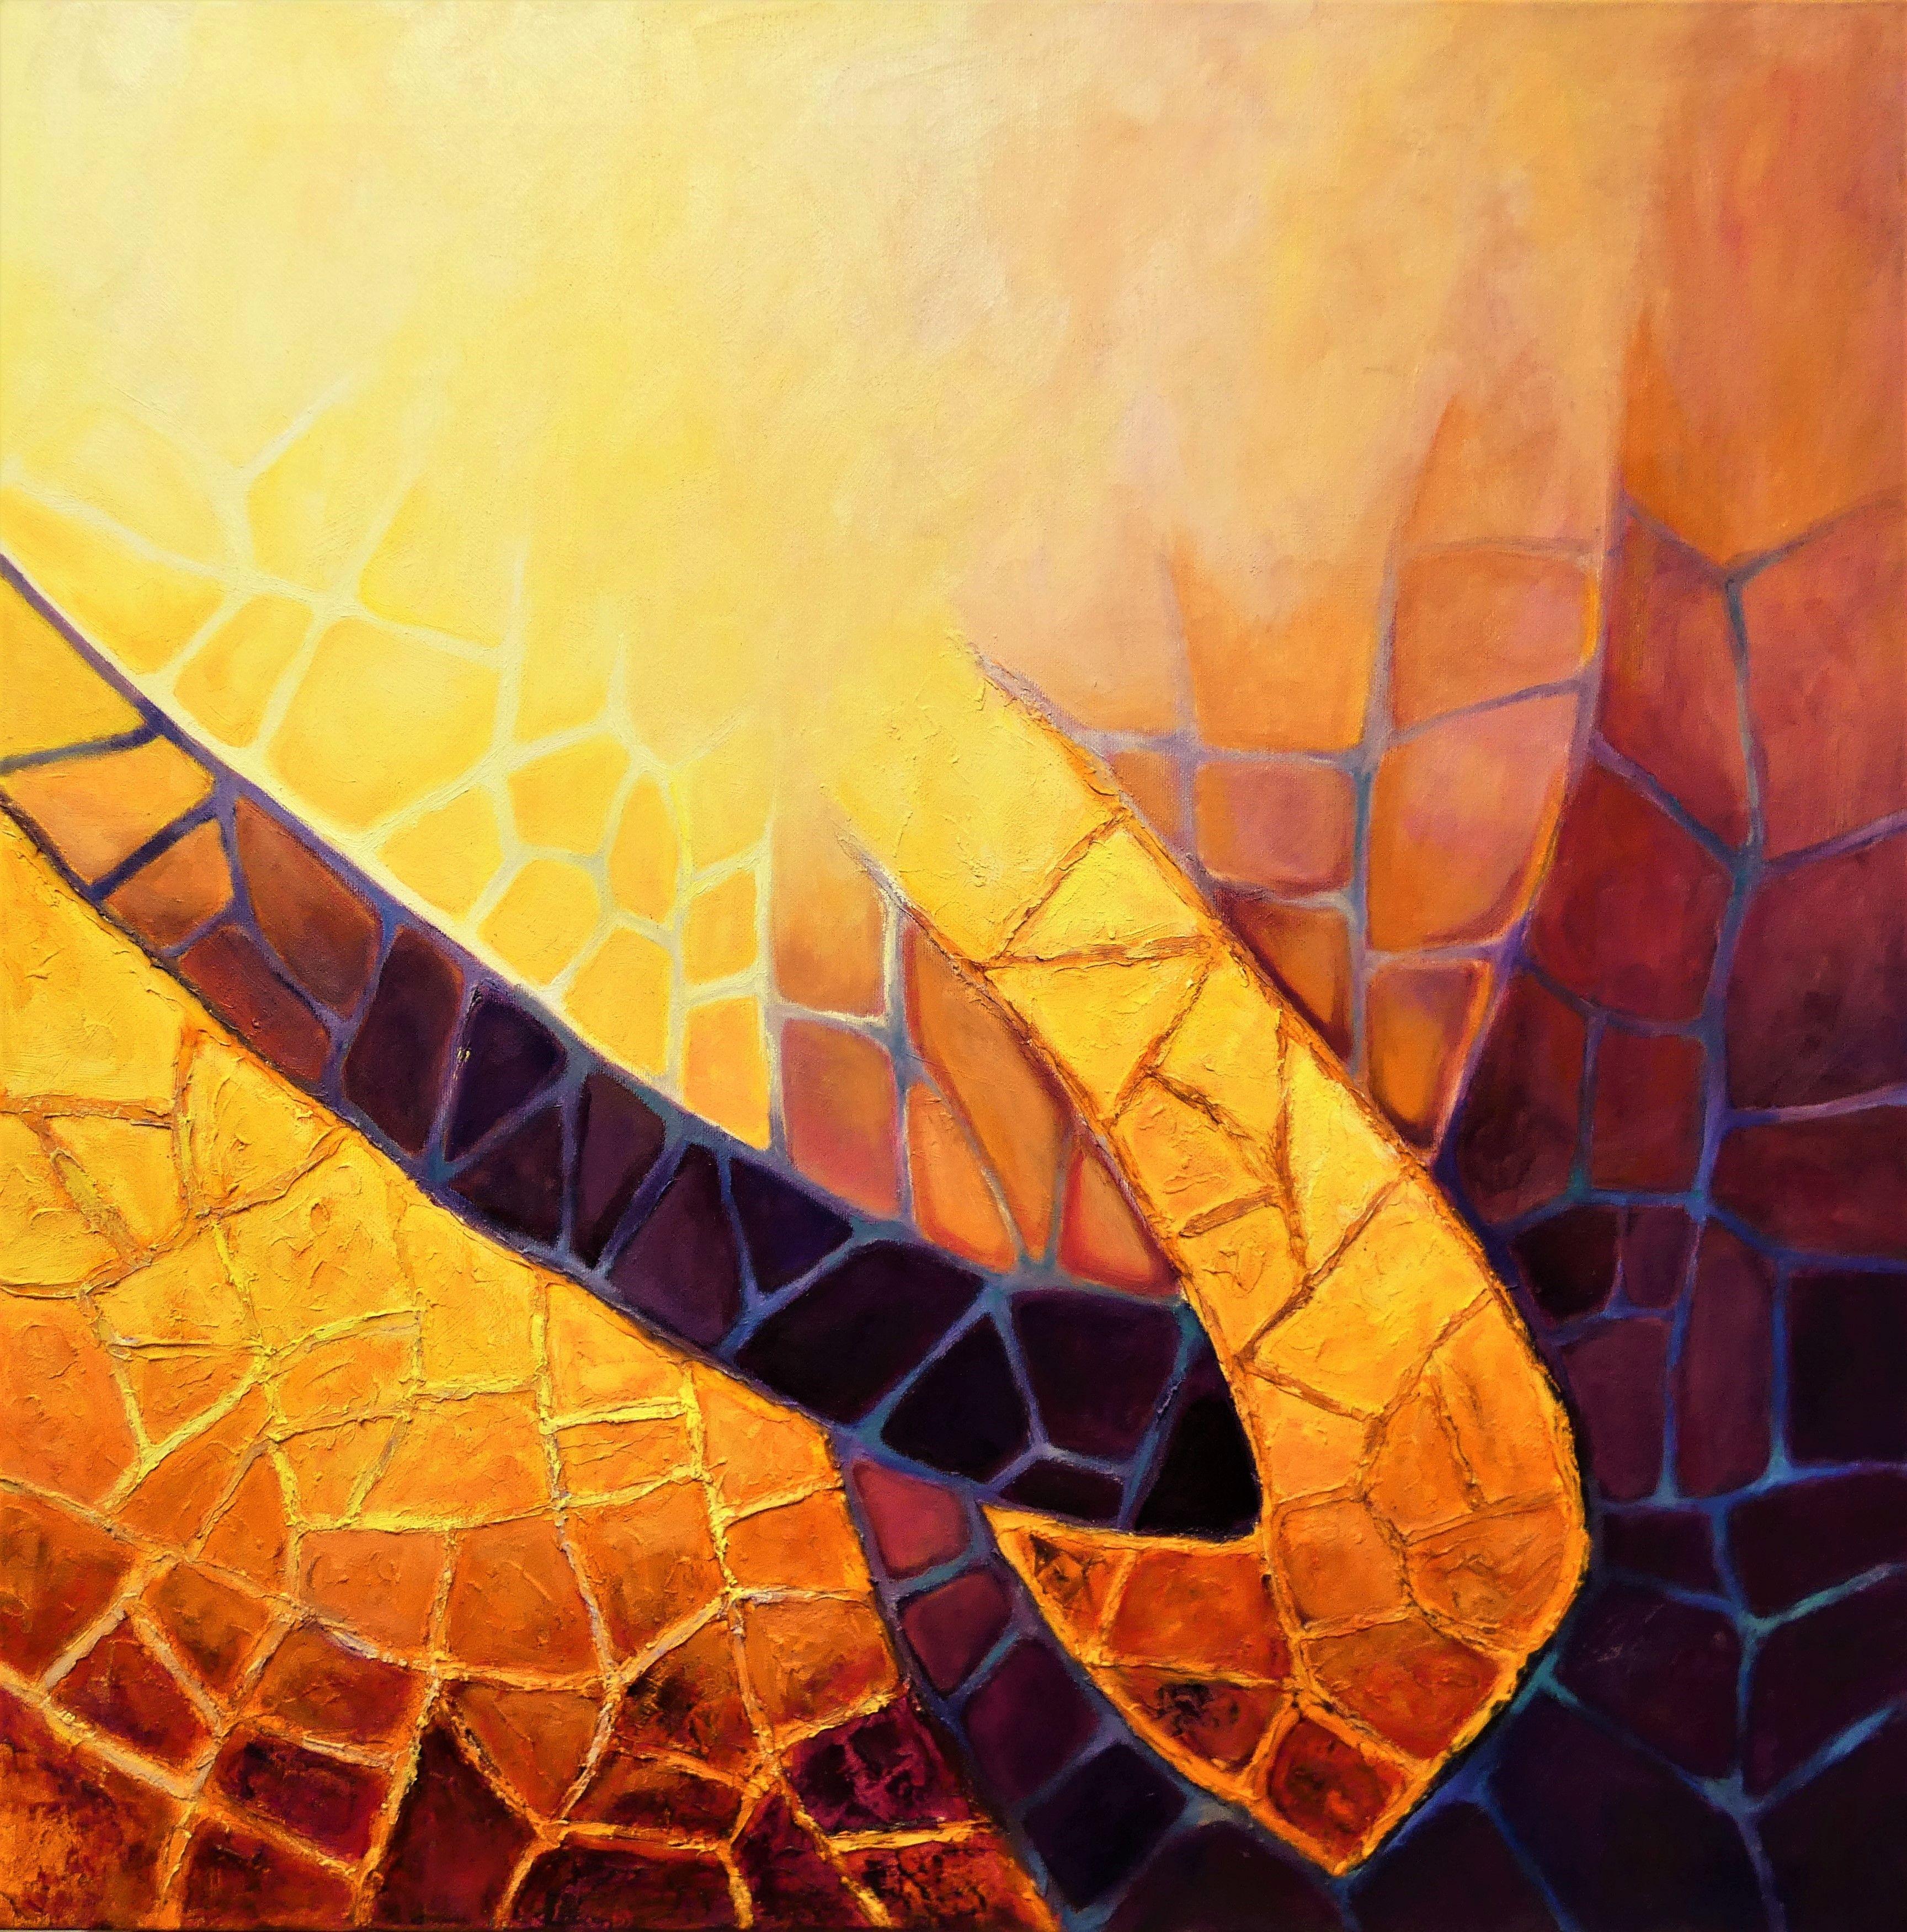 Felicia Trales Abstract Painting - Intuitiv Structures II, Painting, Oil on Canvas